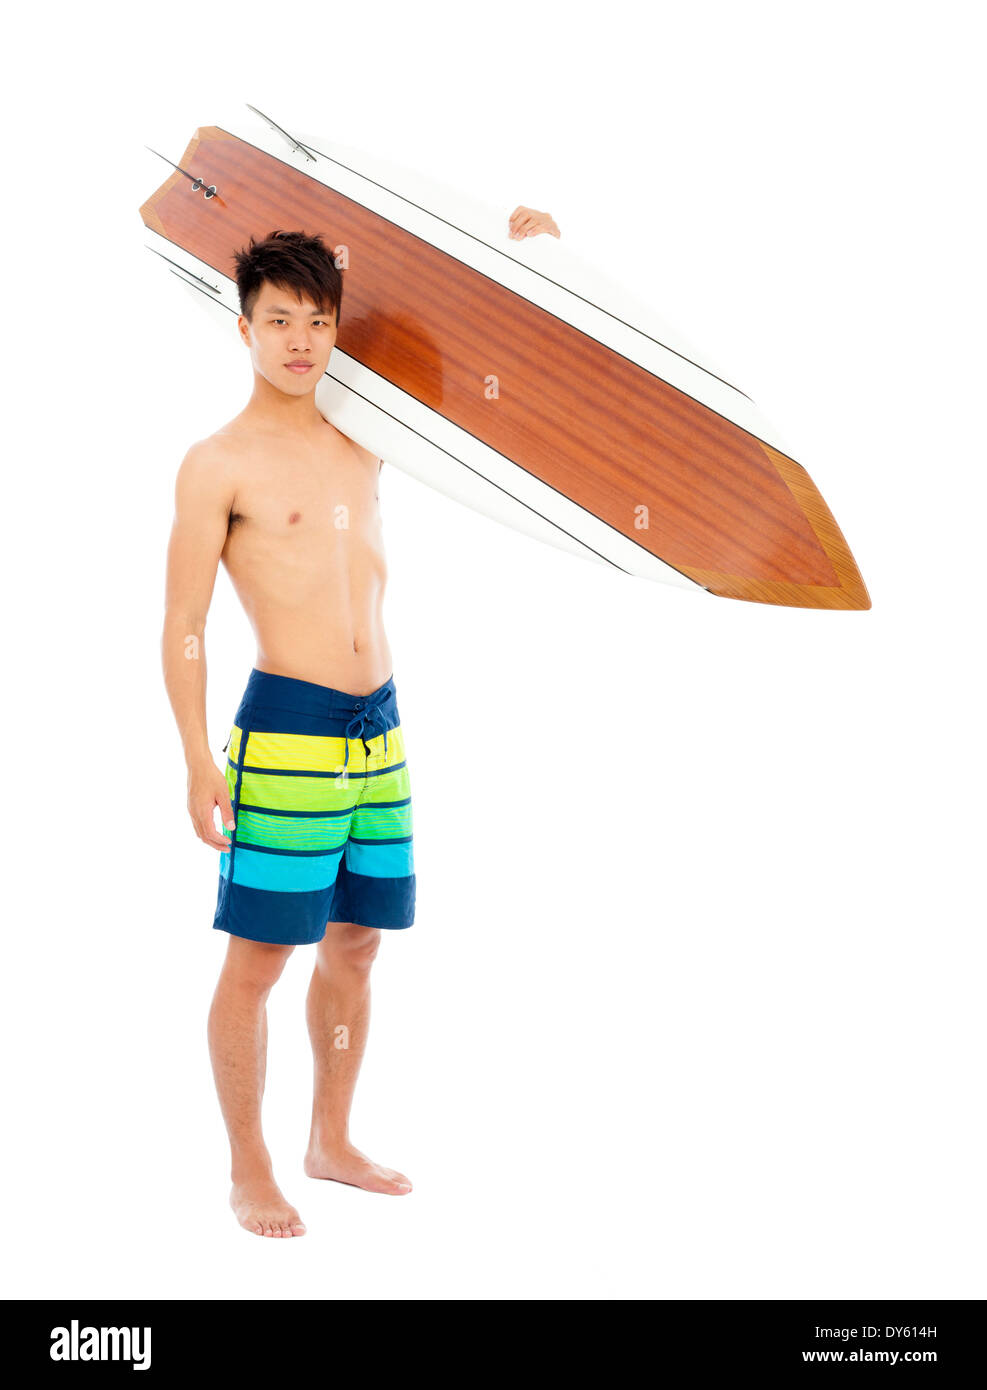 sunny surfer put surfboard on the shoulder Stock Photo